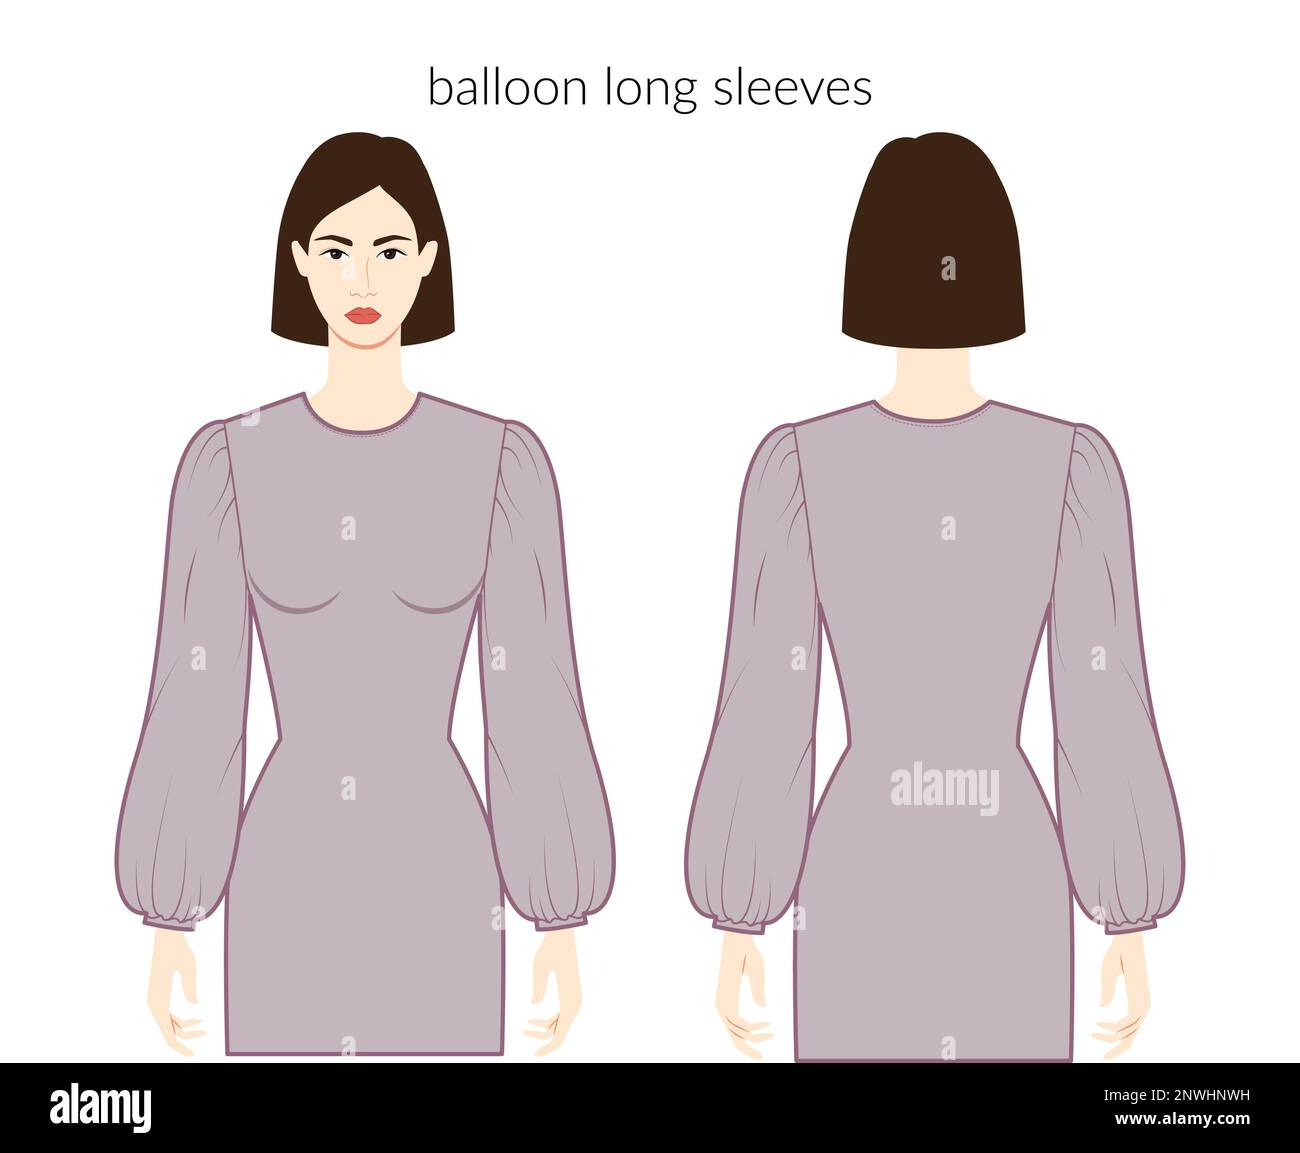 Balloon sleeves melon long length clothes lady in grey top, shirt, dress dresses, tops, shirts technical fashion illustration with fitted body. Flat apparel template. Women, men unisex CAD mockup Stock Vector